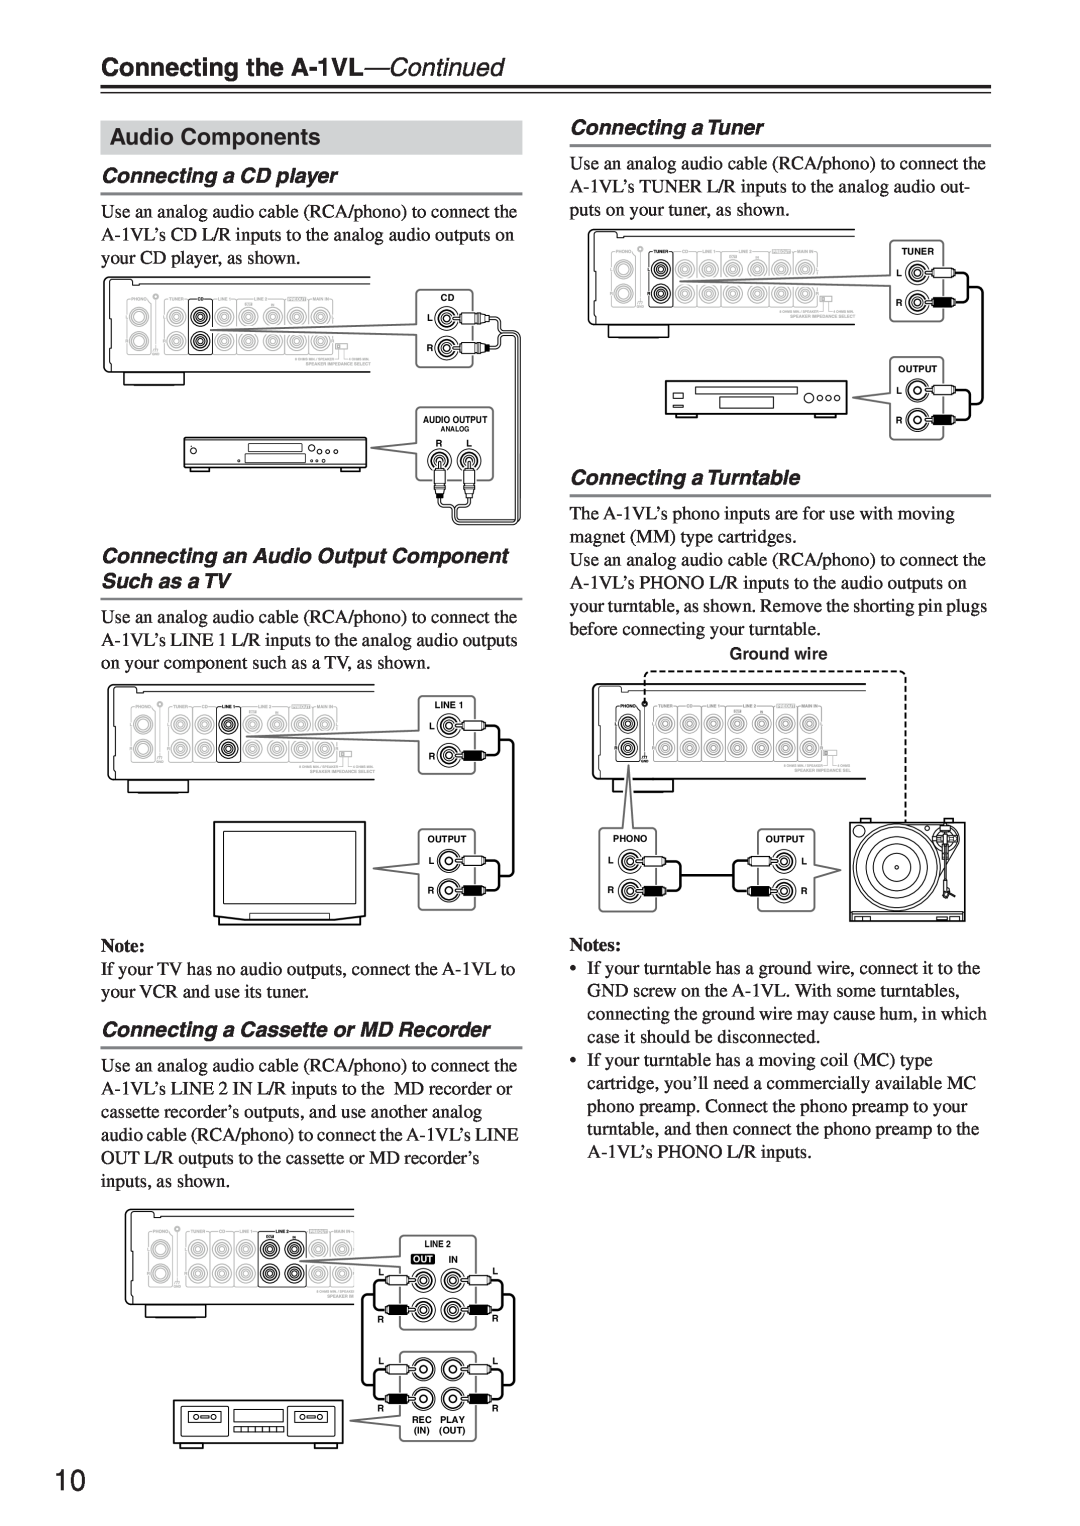 Onkyo instruction manual Connecting the A-1VL-Continued, Audio Components, Connecting a Tuner, Connecting a CD player 